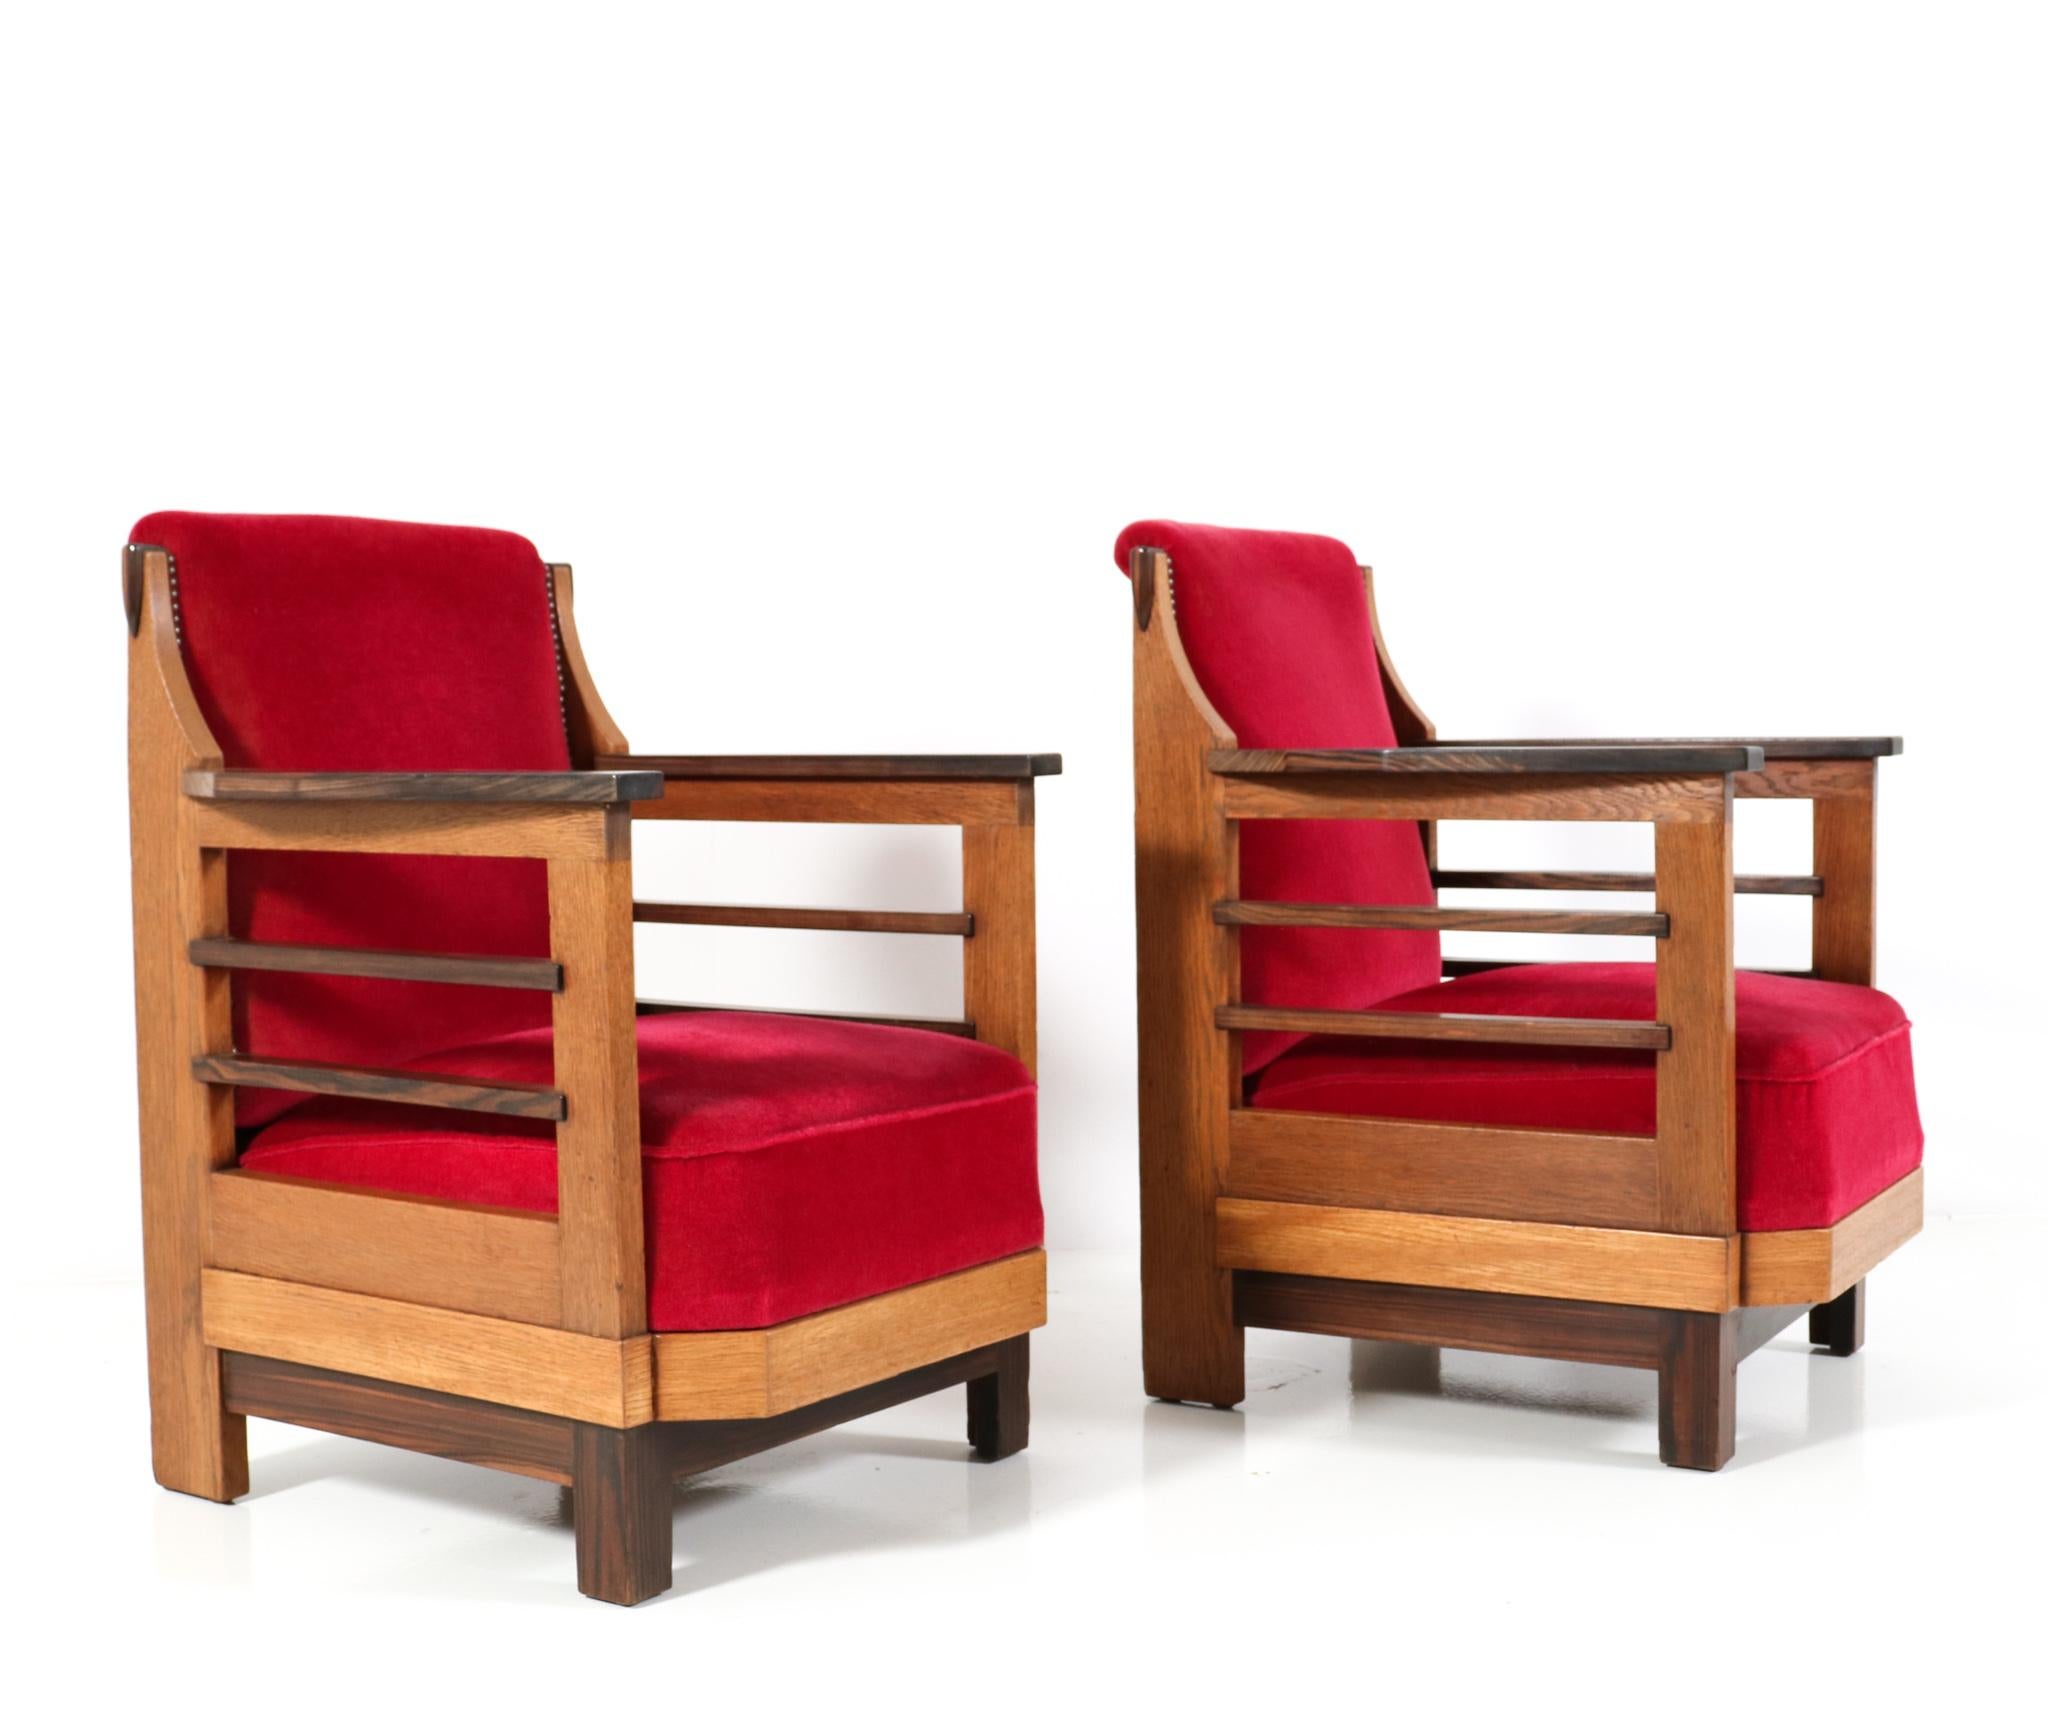 Fabric Pair of Art Deco Amsterdamse School Lounge Chairs by Anton Lucas Leiden, 1920s